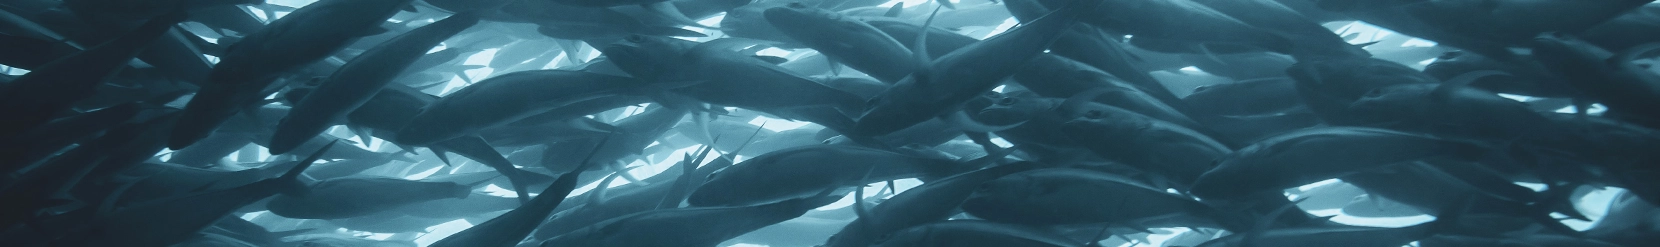 A close up photograph of a school of fish.